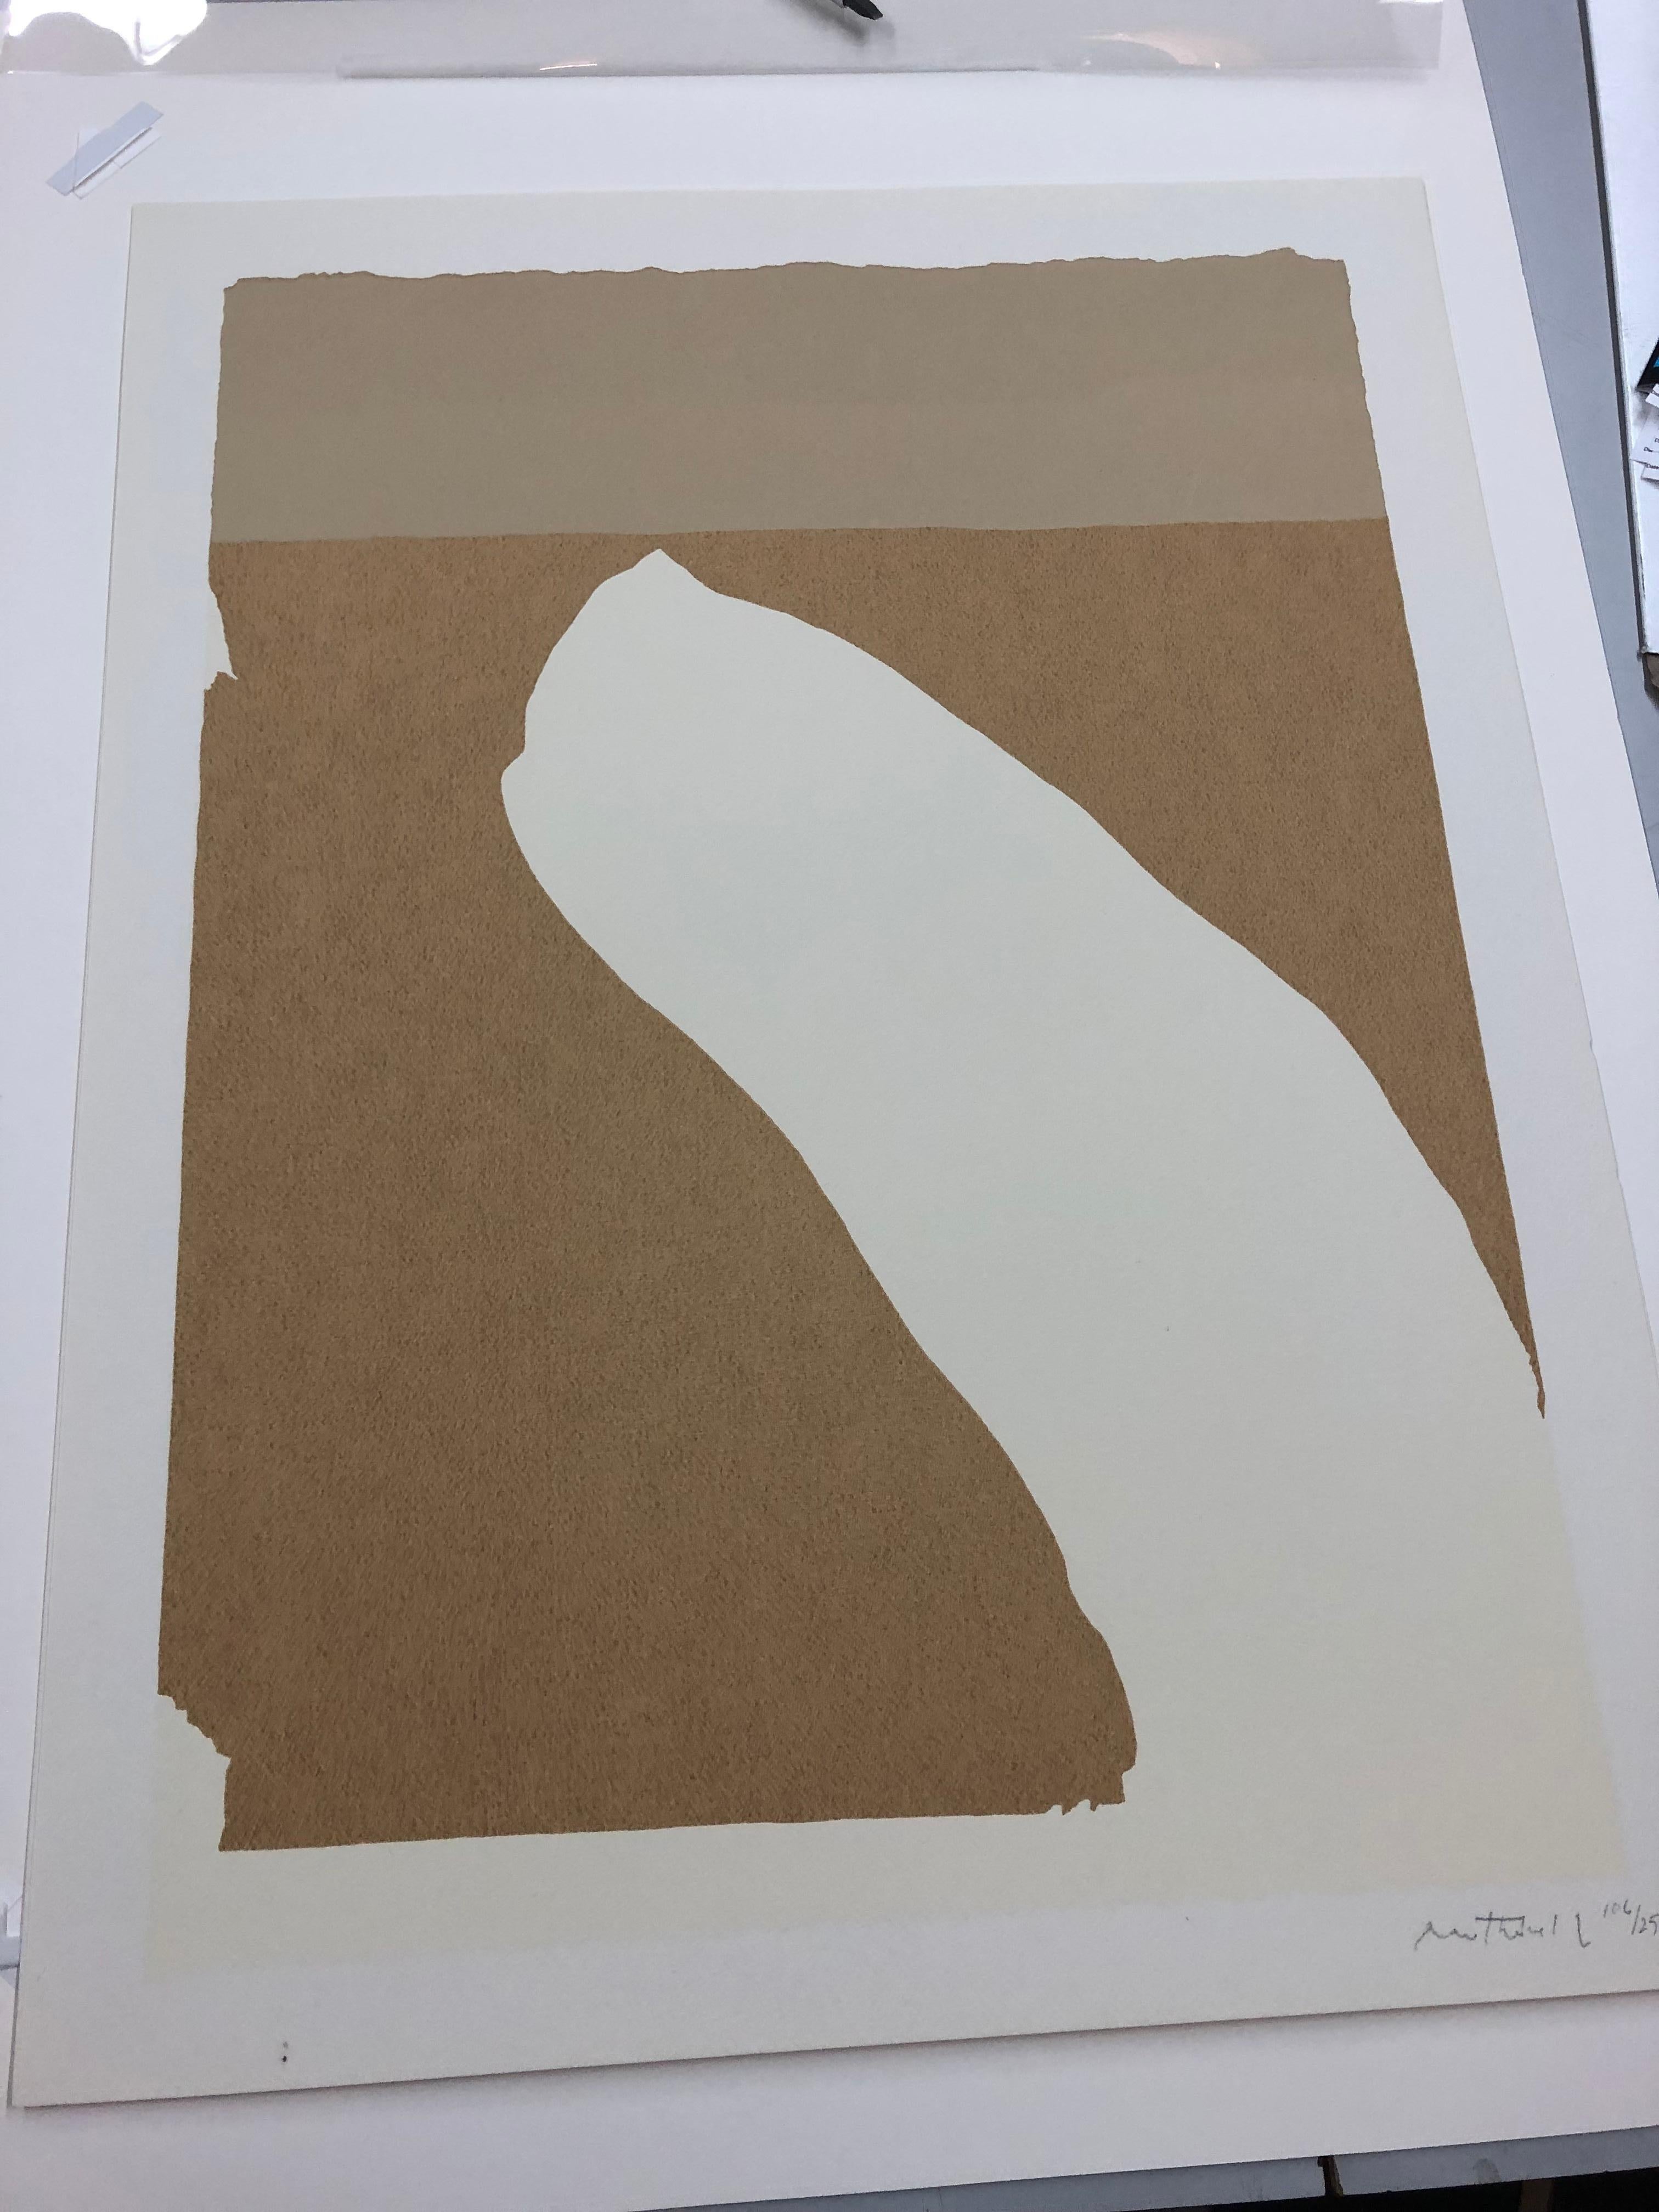 Untitled - Print by Robert Motherwell